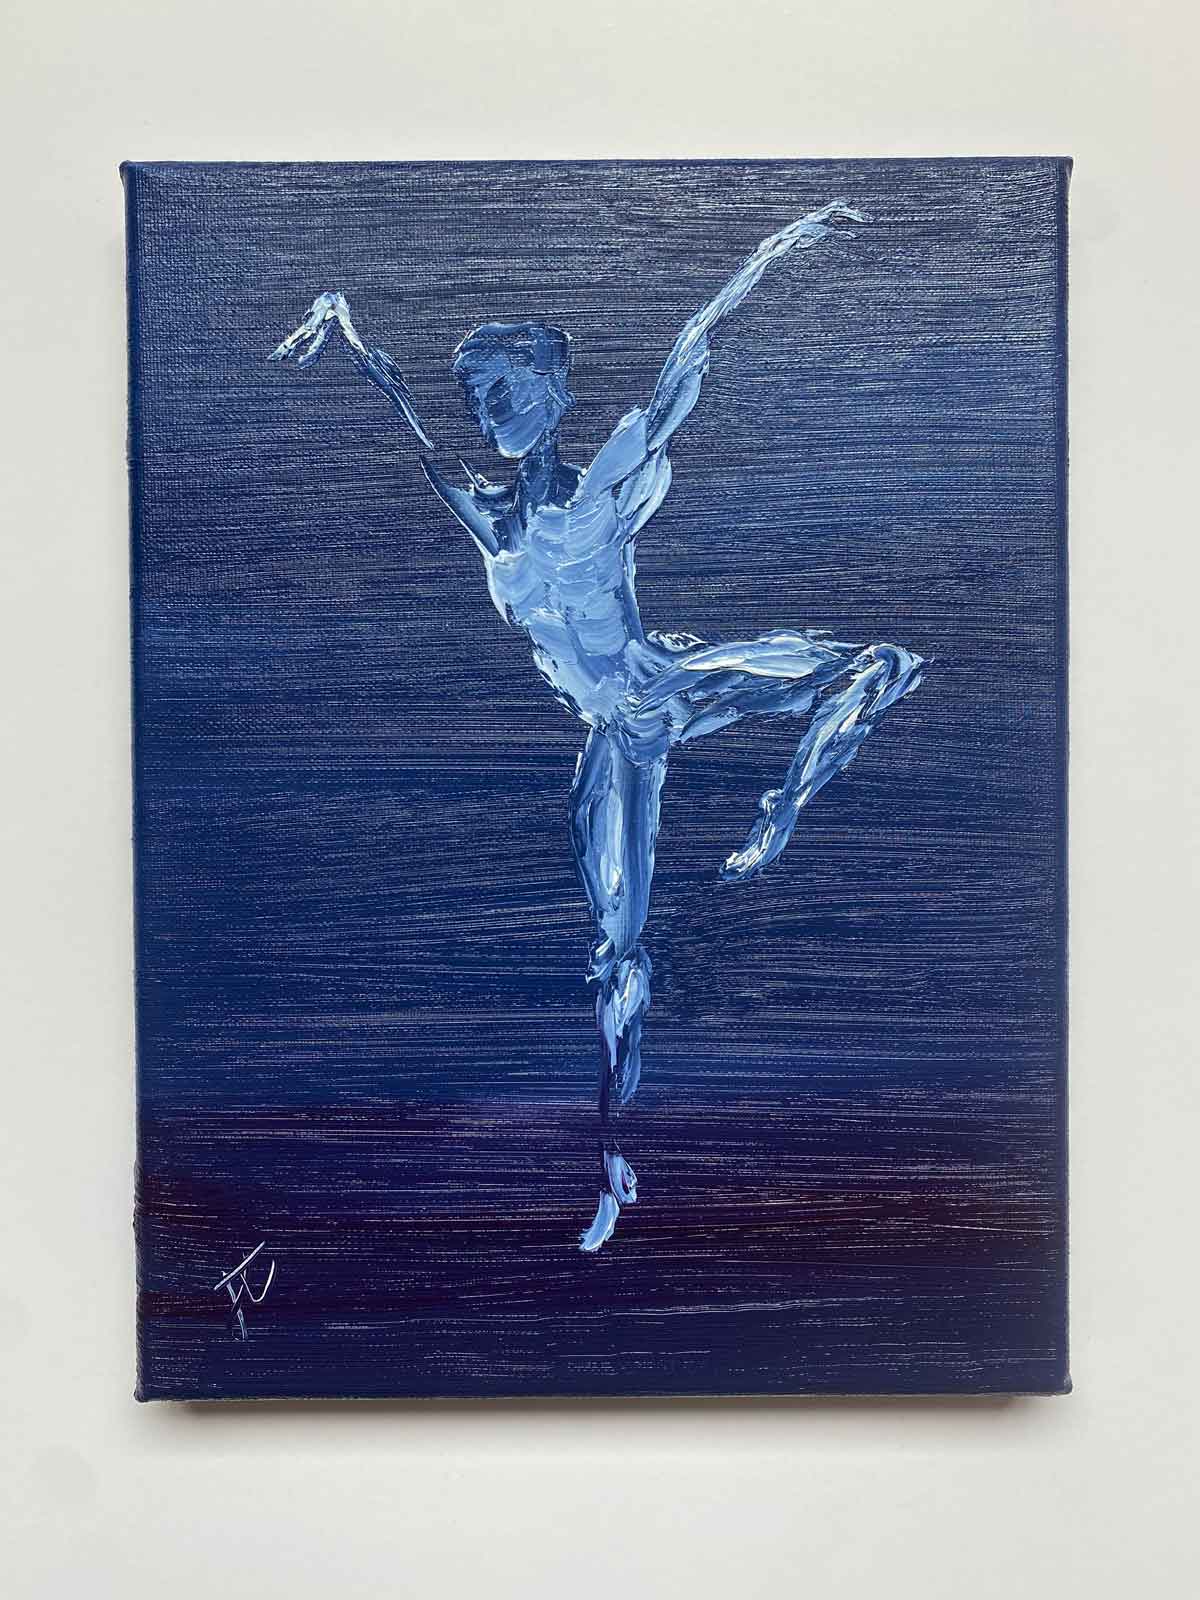 Believe in your dreams: dancer oil painting